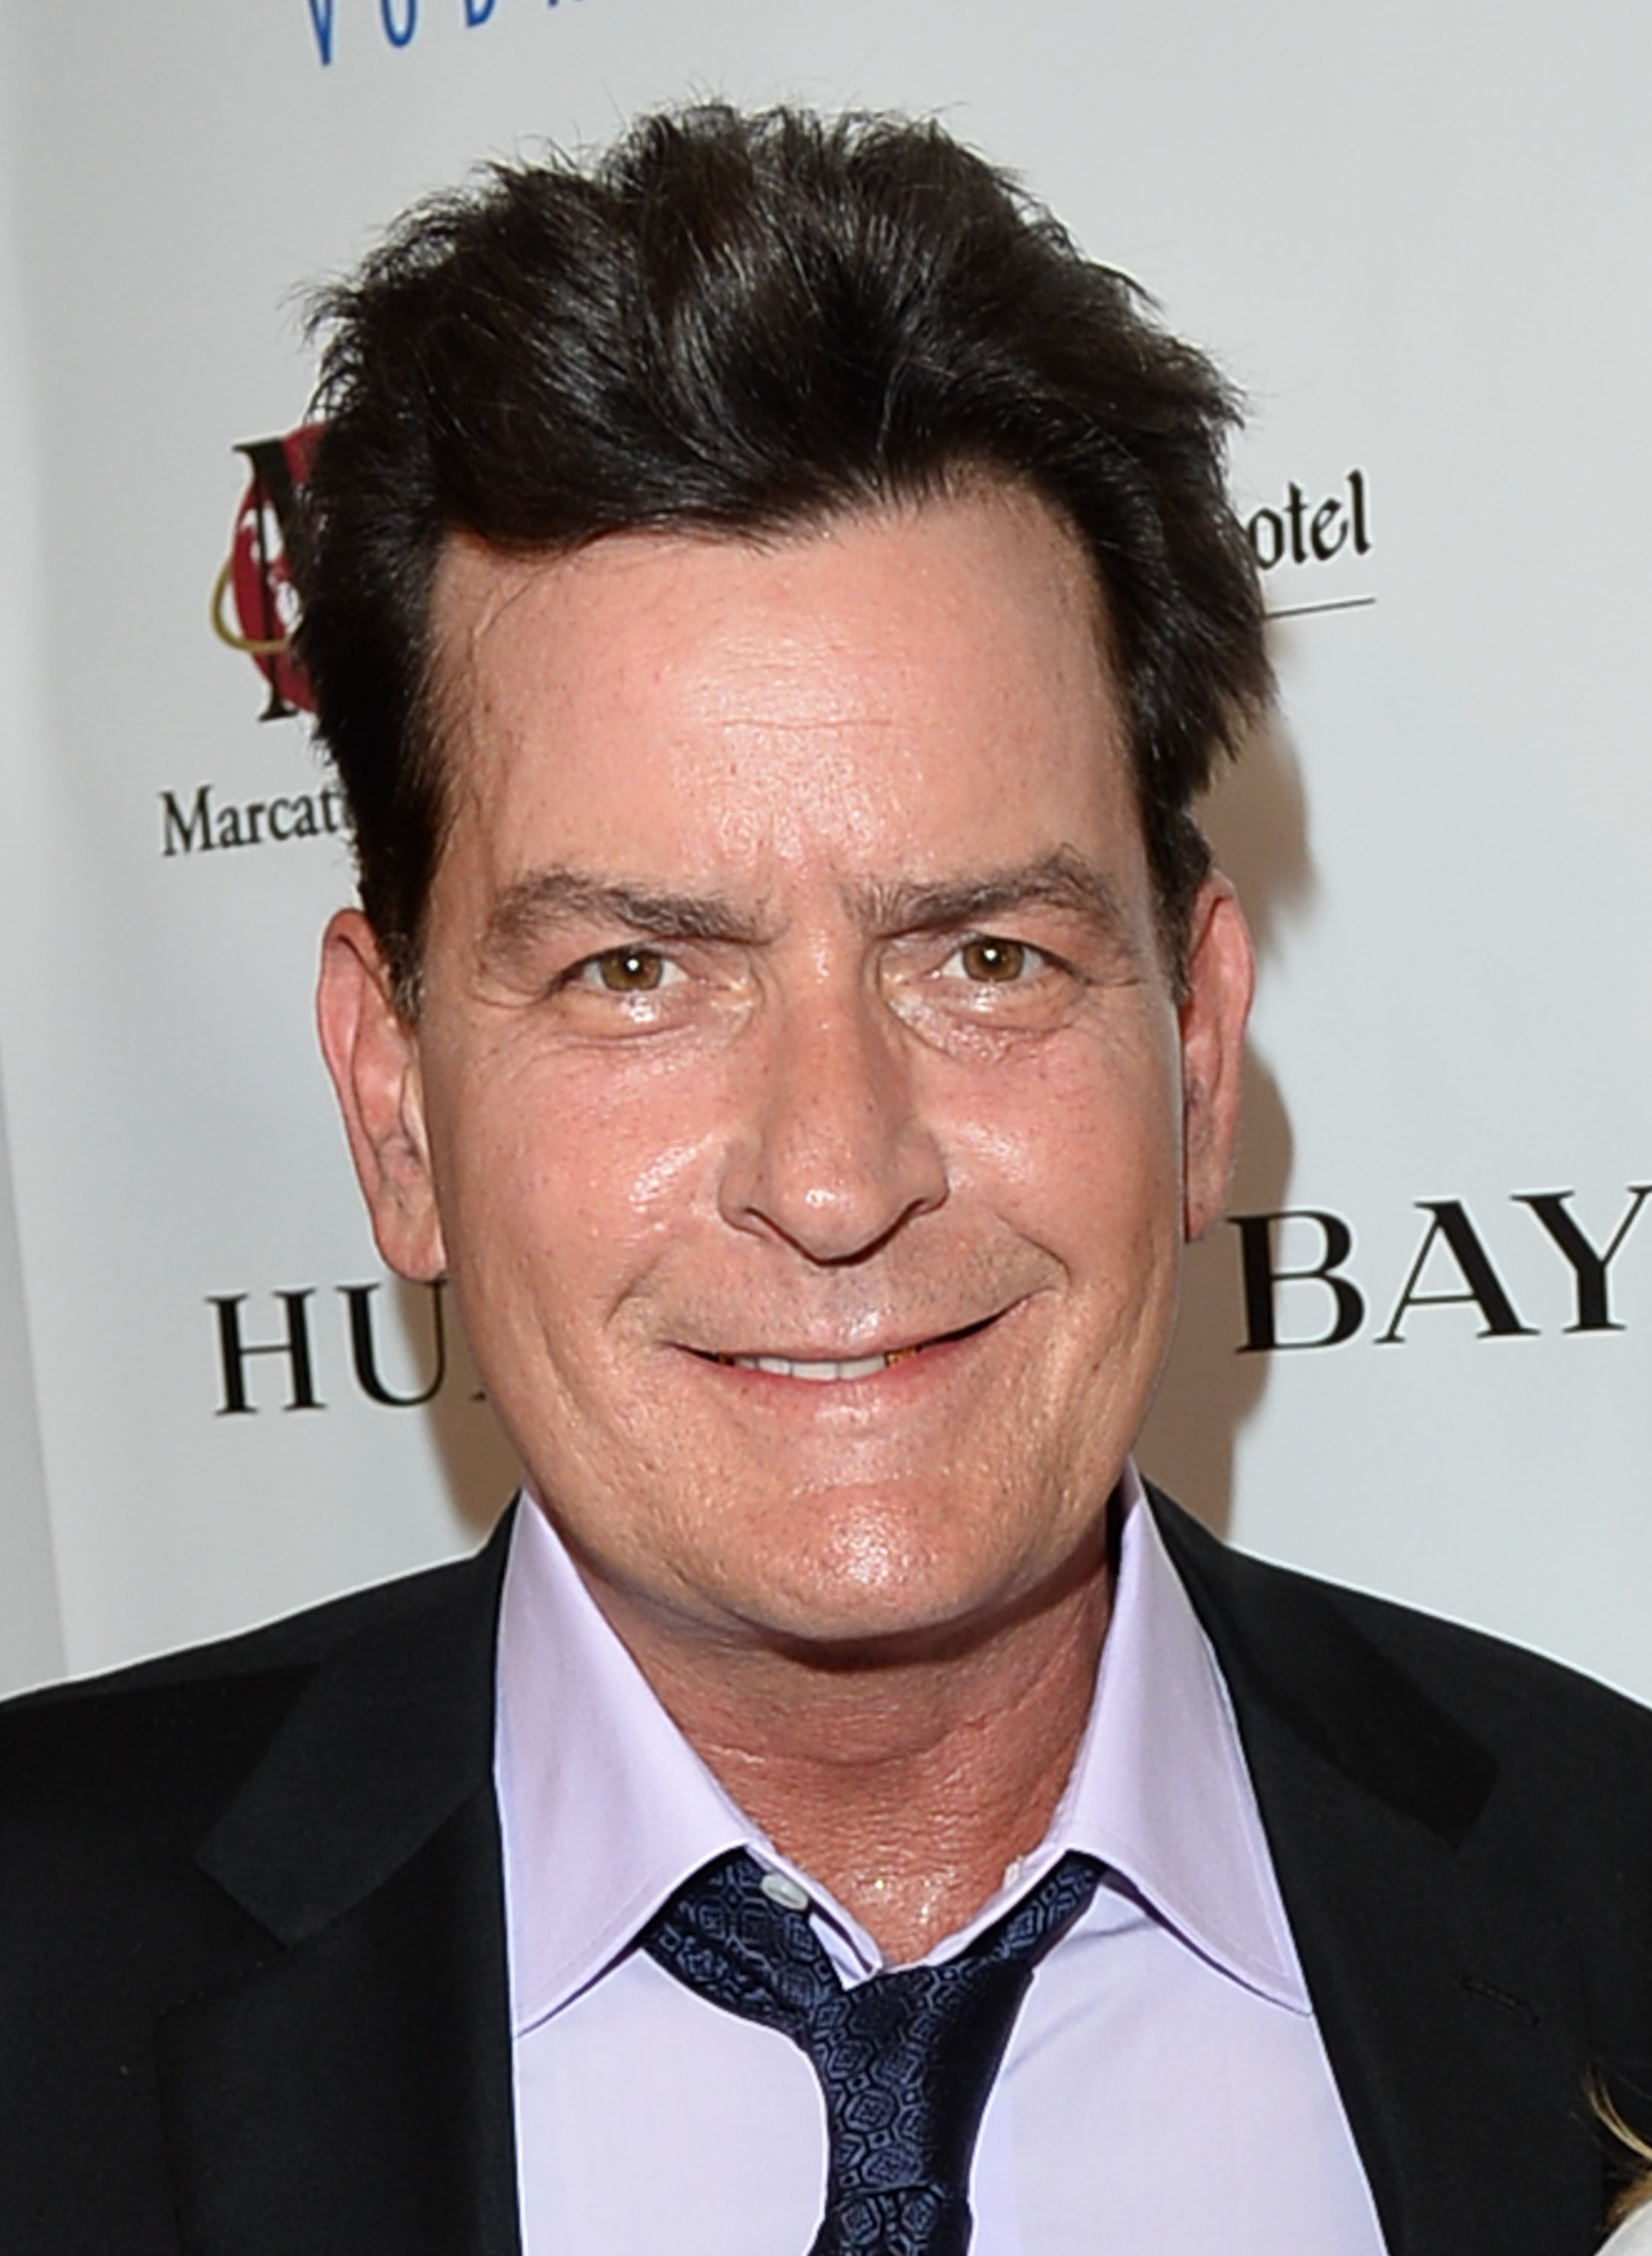 Actor Charlie Sheen attends the Joe Carter Classic Charity Golf Tournament after-party at Shangri-La Hotel on June 26, 2014 in Toronto.